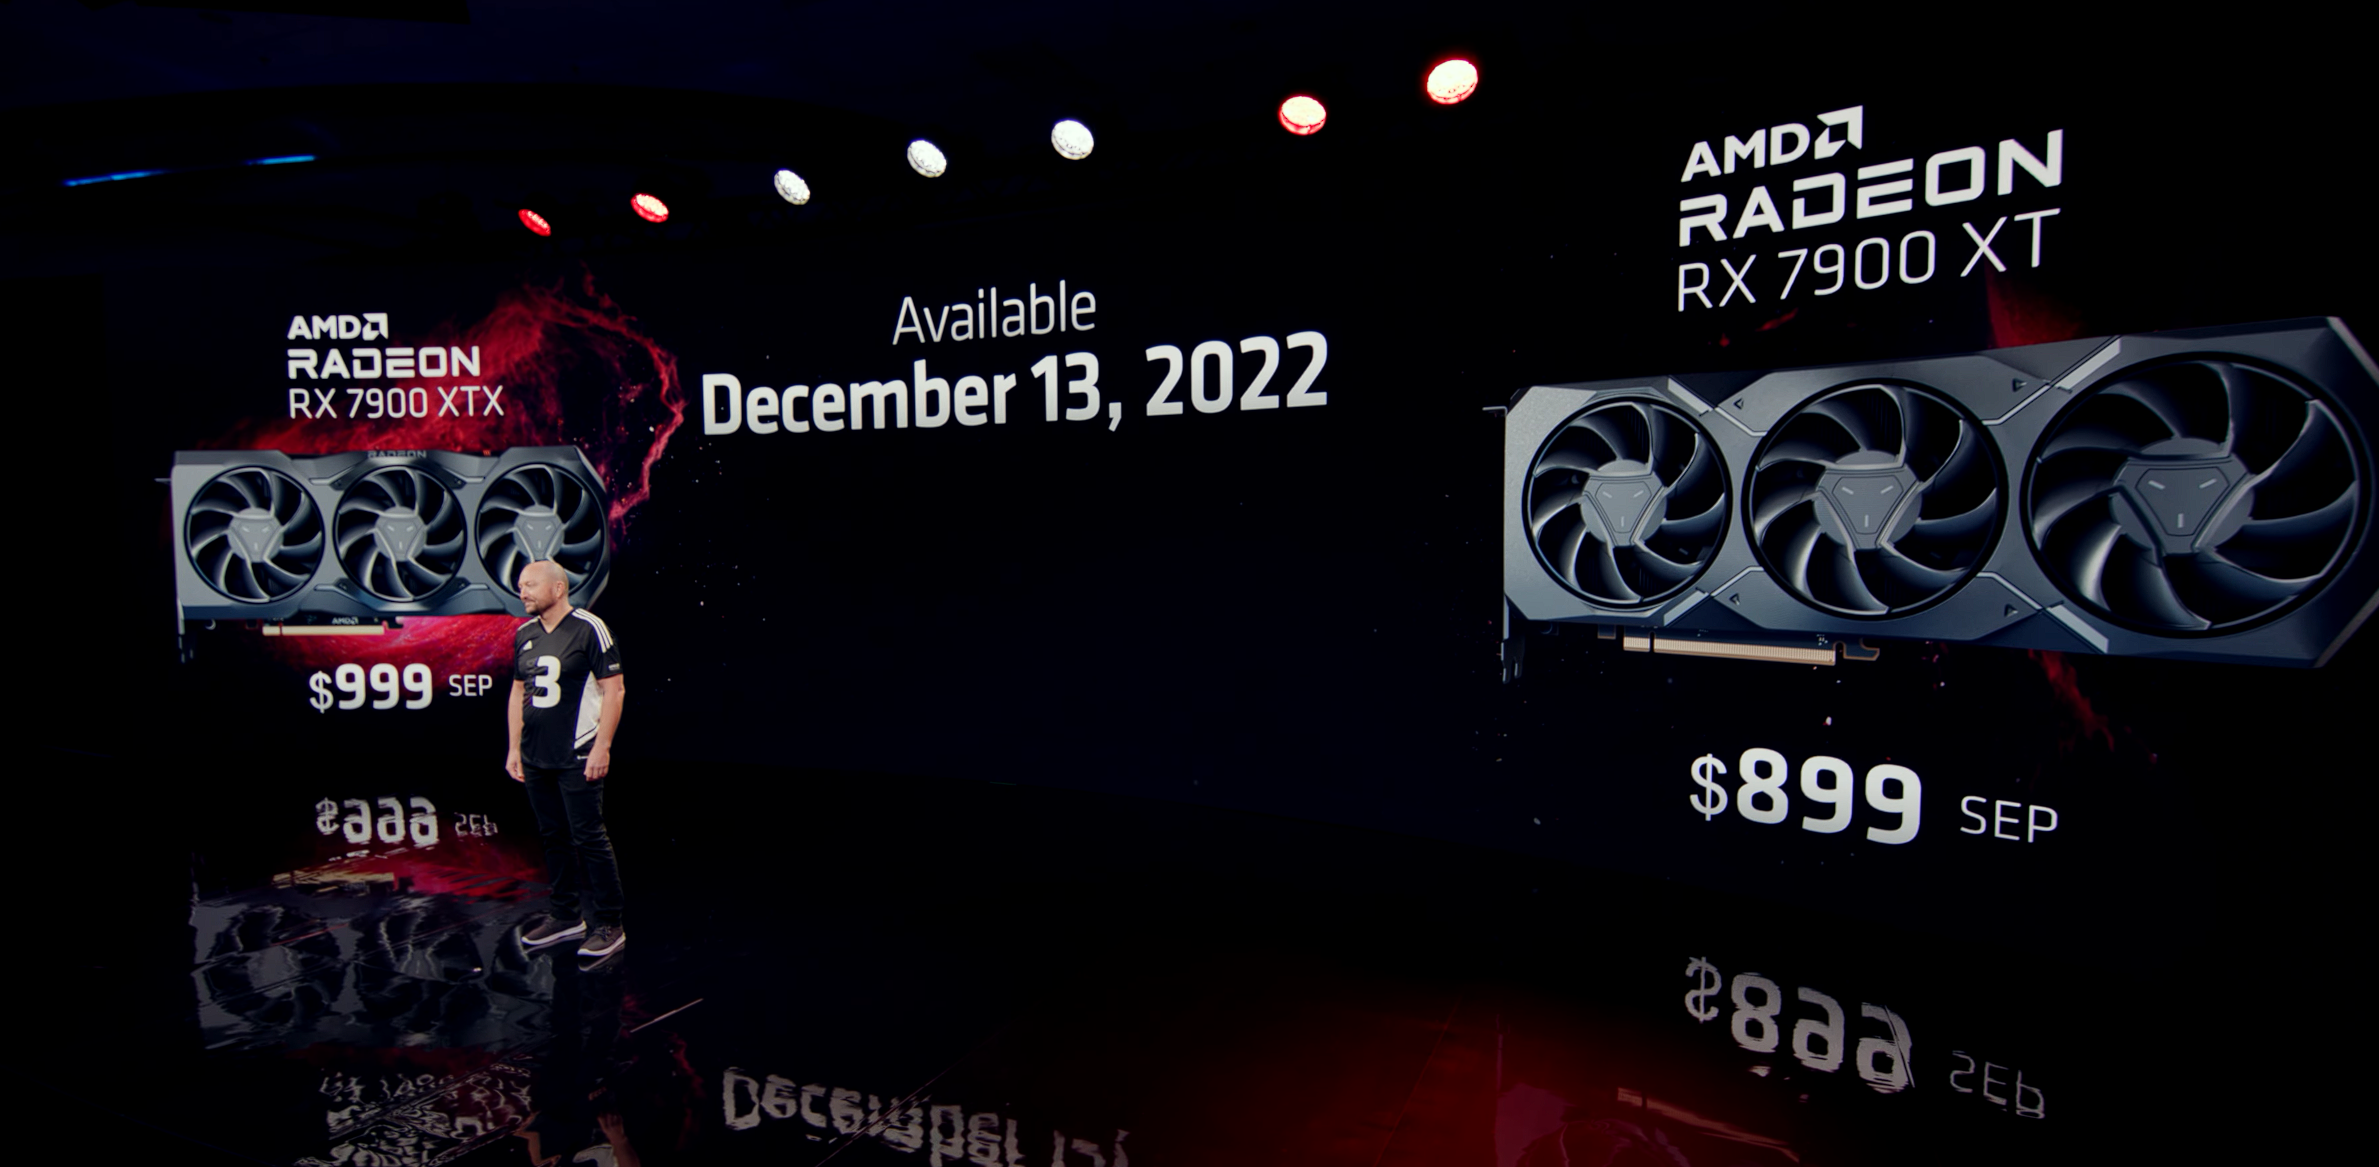 AMD RDNA 3 graphic cards will be available on December 12th, 2022.